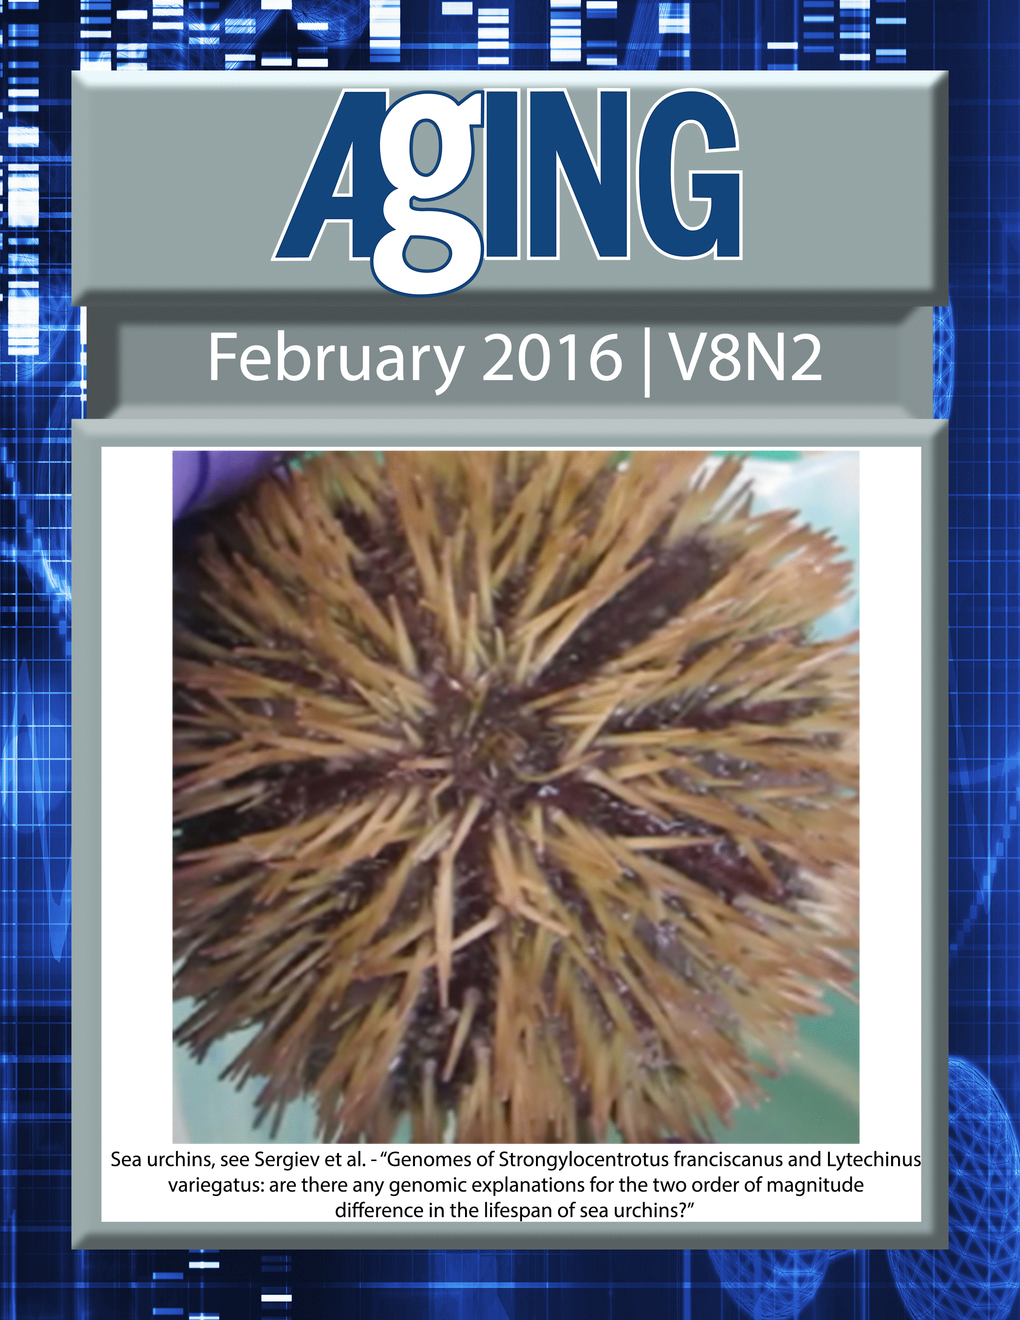 The cover for issue 2 of Aging features Figure 1B, 'Genomes of Strongylocentrotus franciscanus and Lytechinus variegatus: are there any genomic explanations for the two order of magnitude difference in the lifespan of sea urchins?' from Sergiev et al.